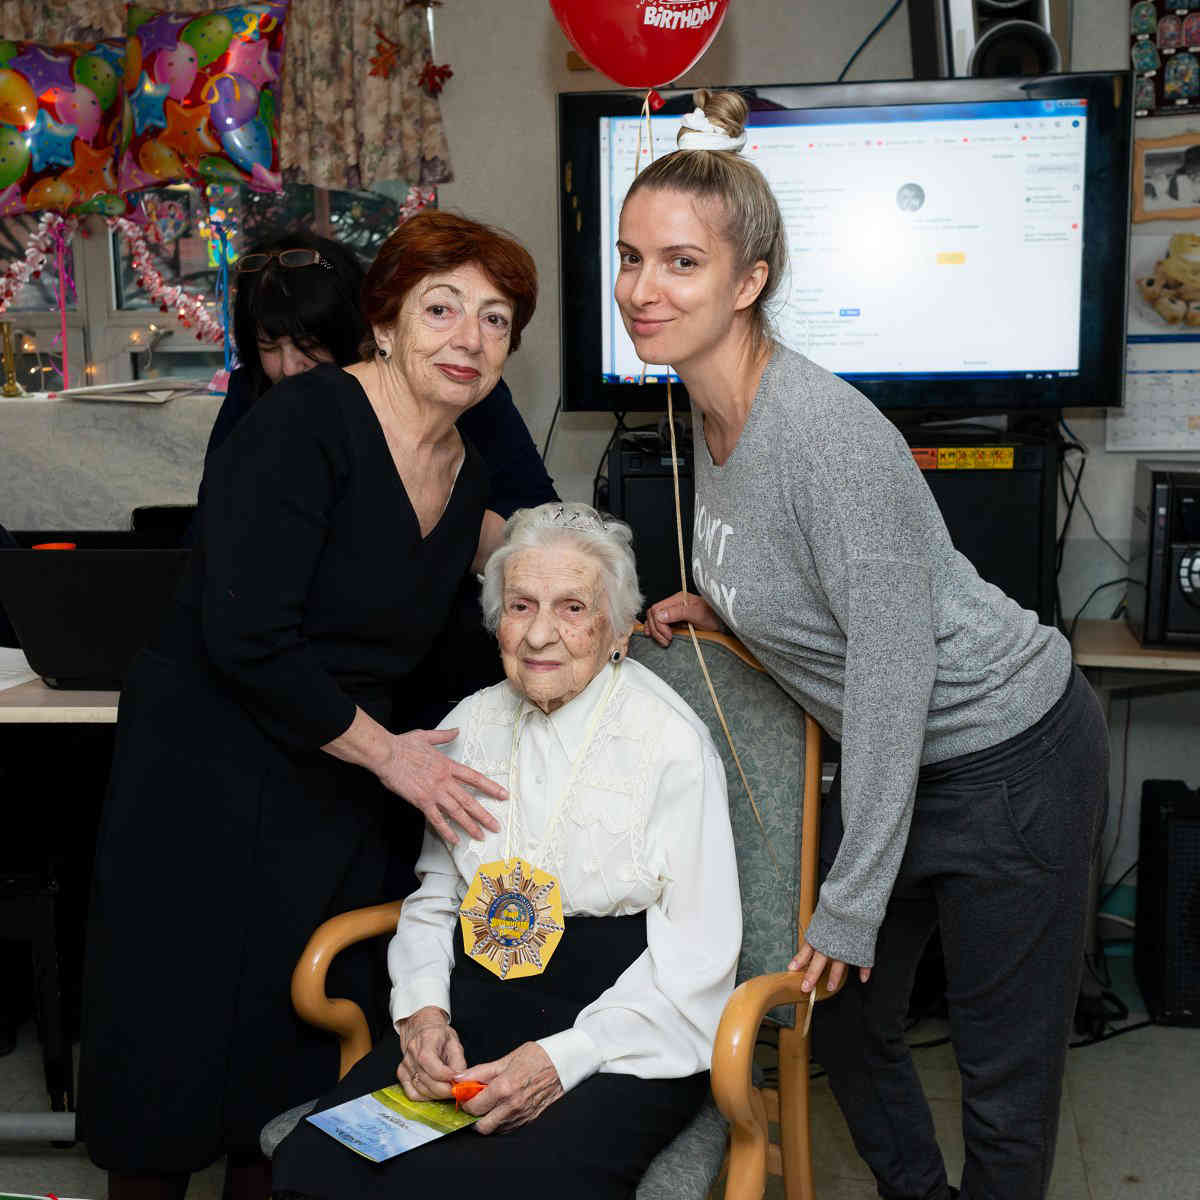 Blow out the candles for Bensonhurst resident’s 100th birthday